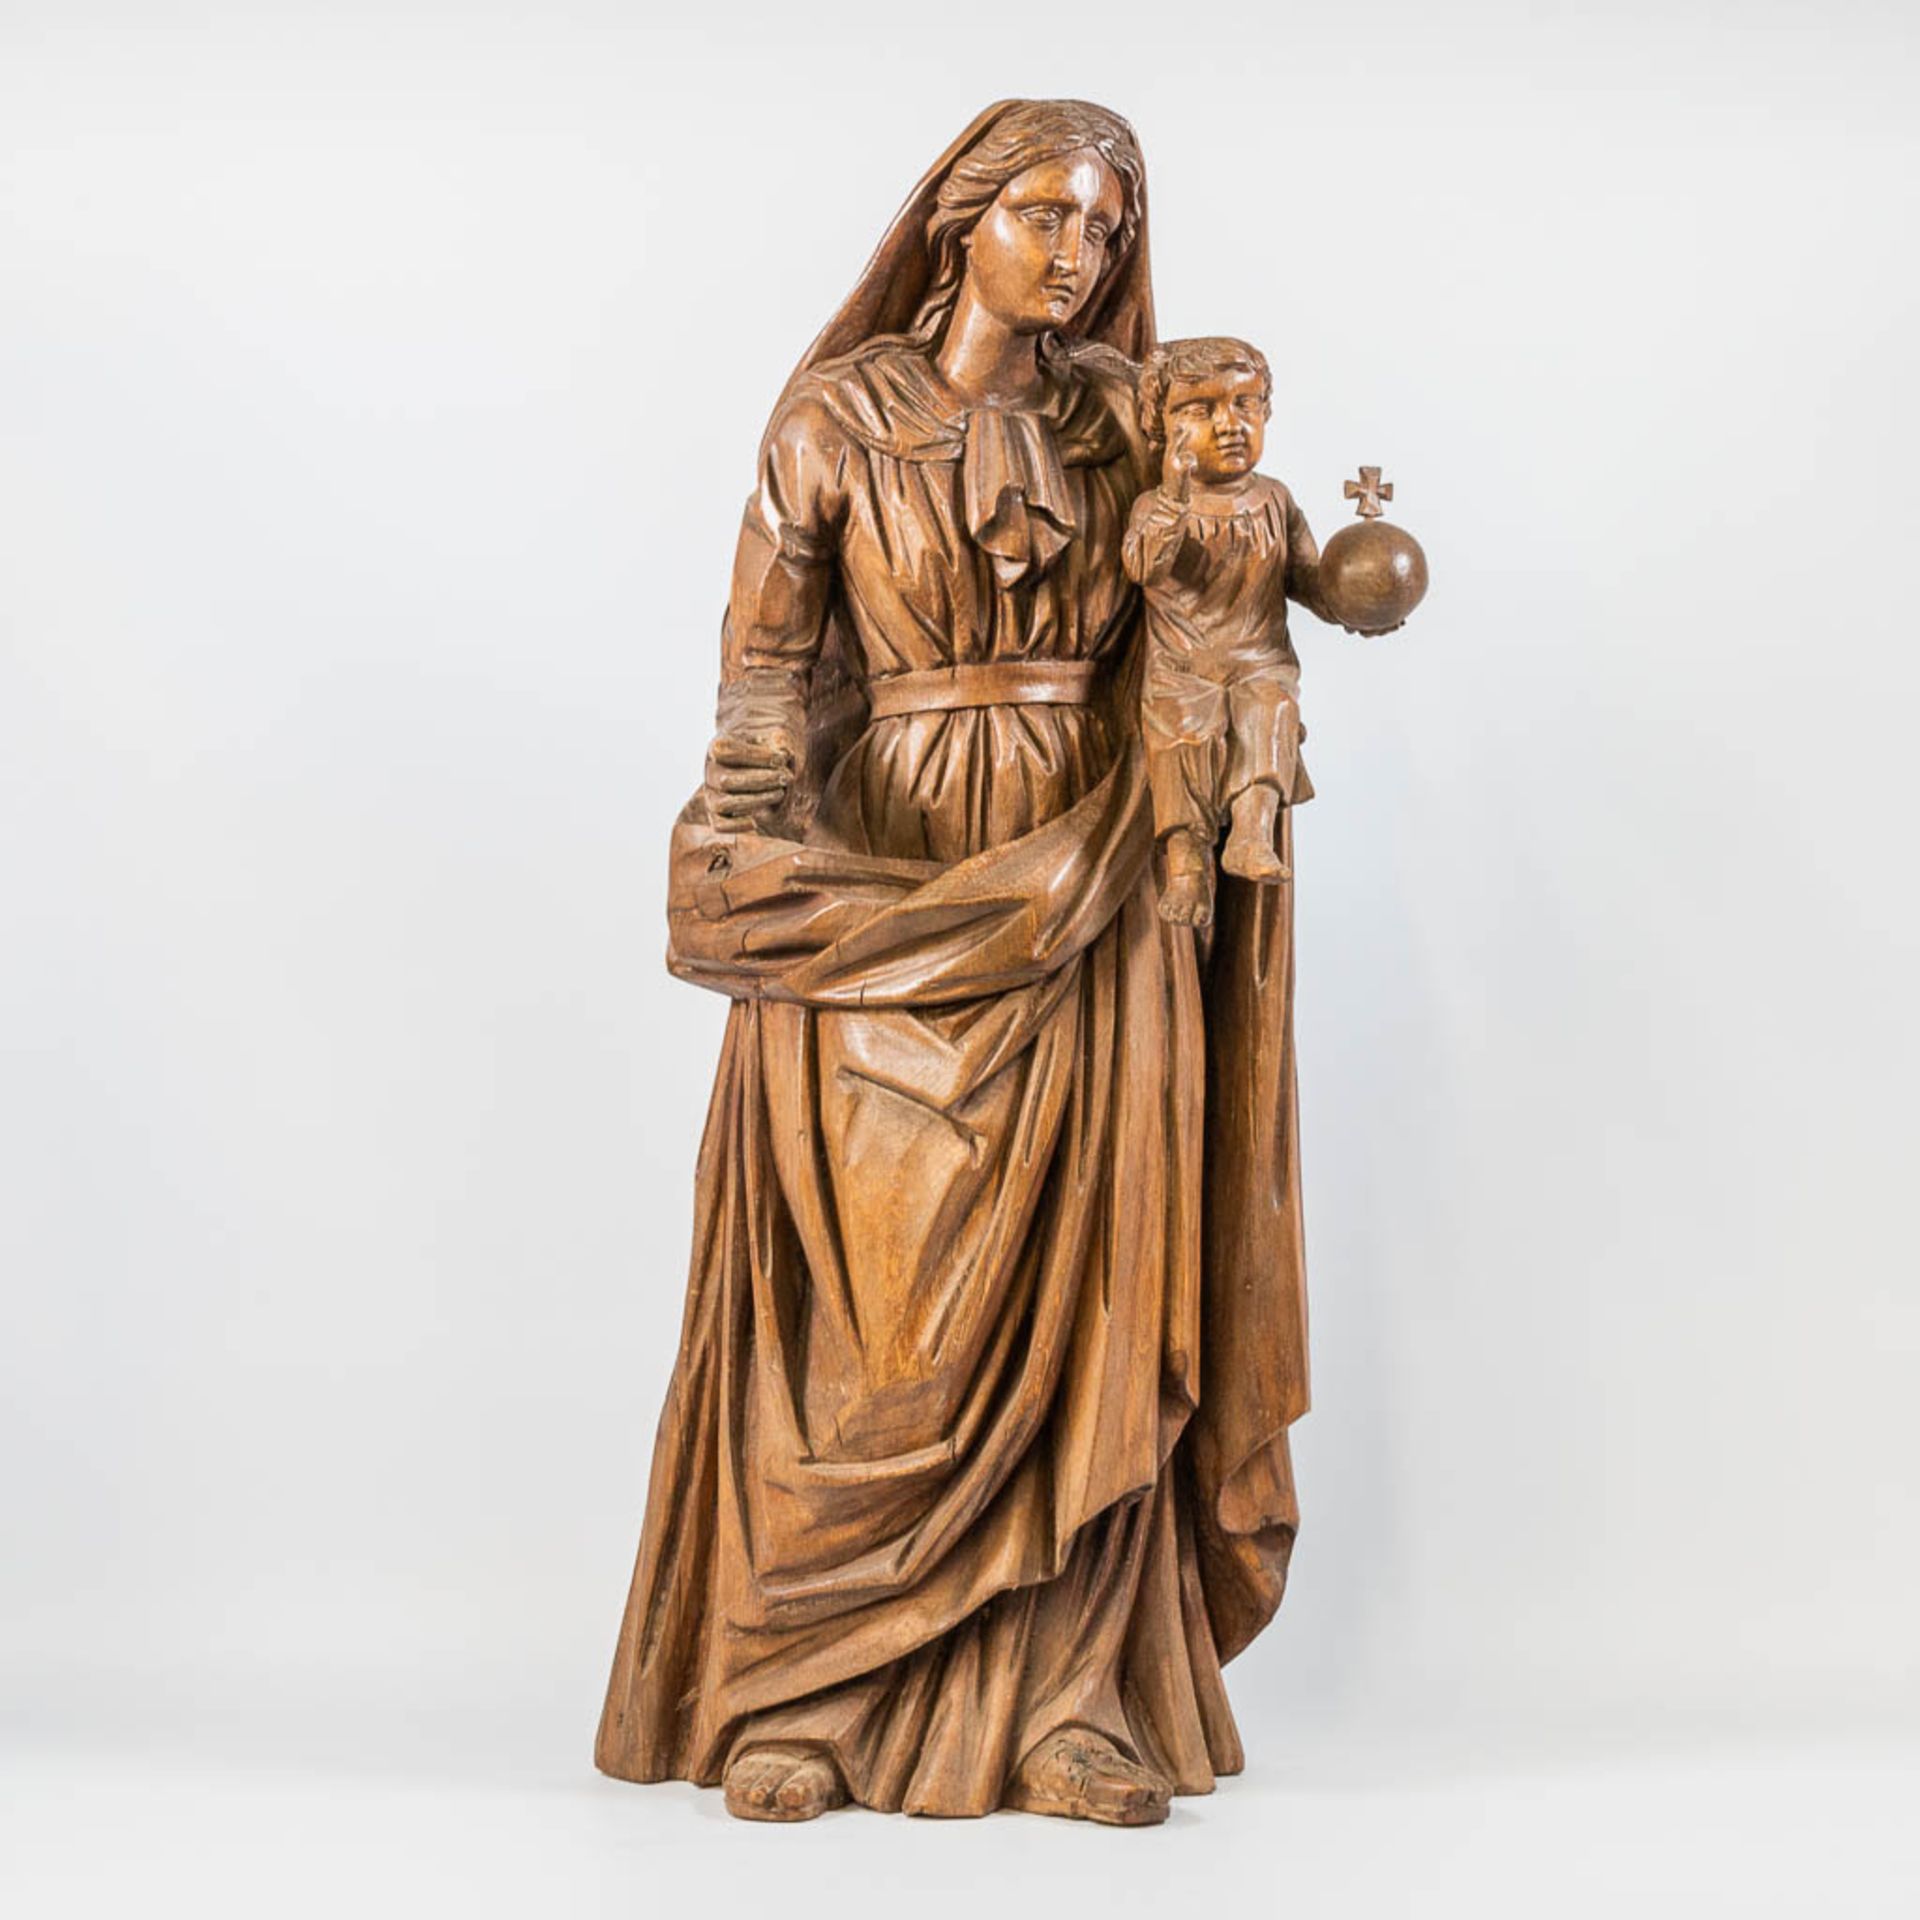 A wood sculptured Mary and Jesus figurine with globus cruciger. 19th century.